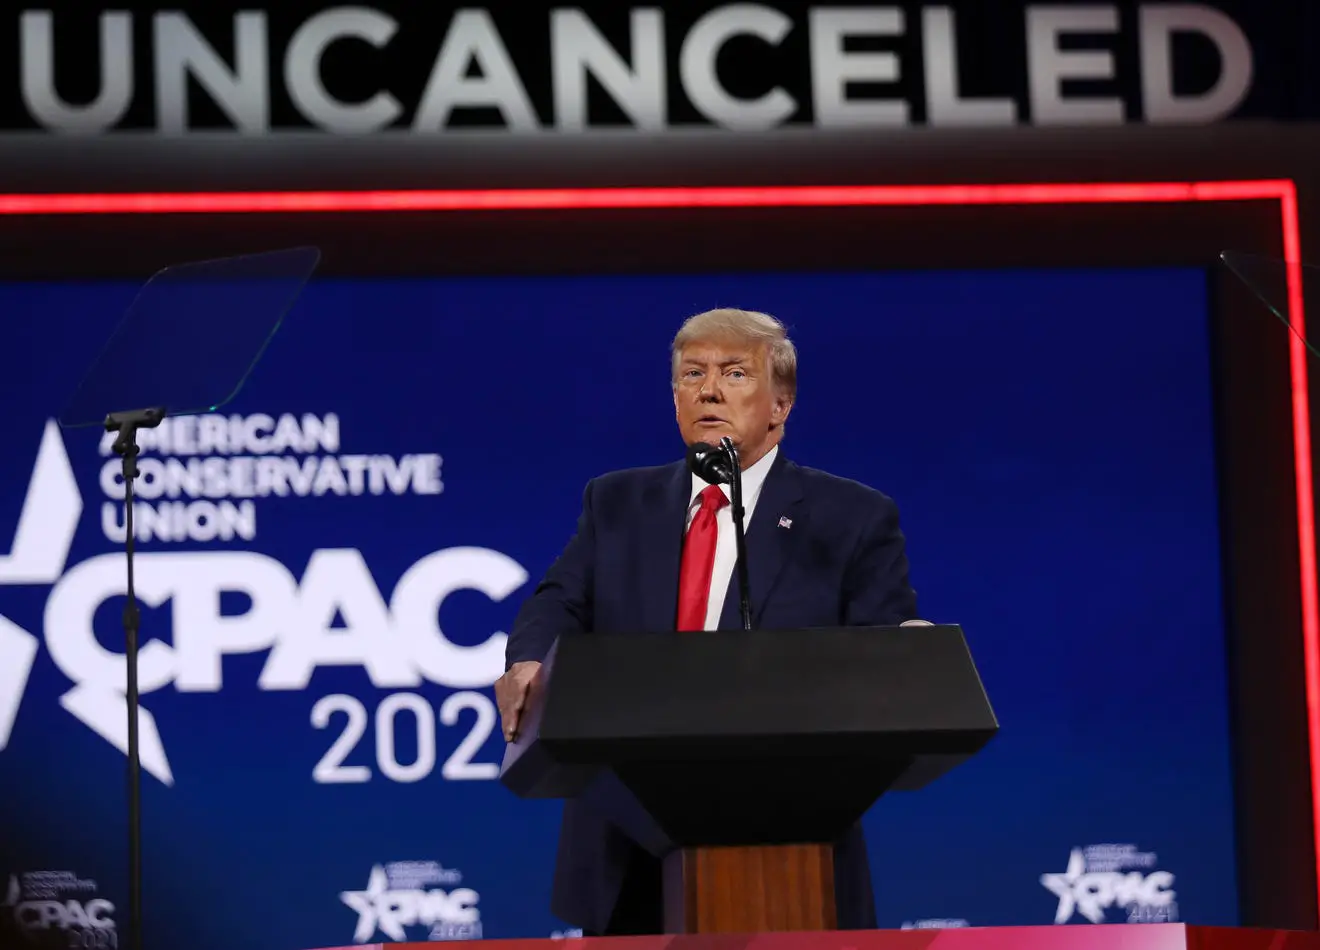 Trump CPAC comeback speech showed a sad little man angry at the world